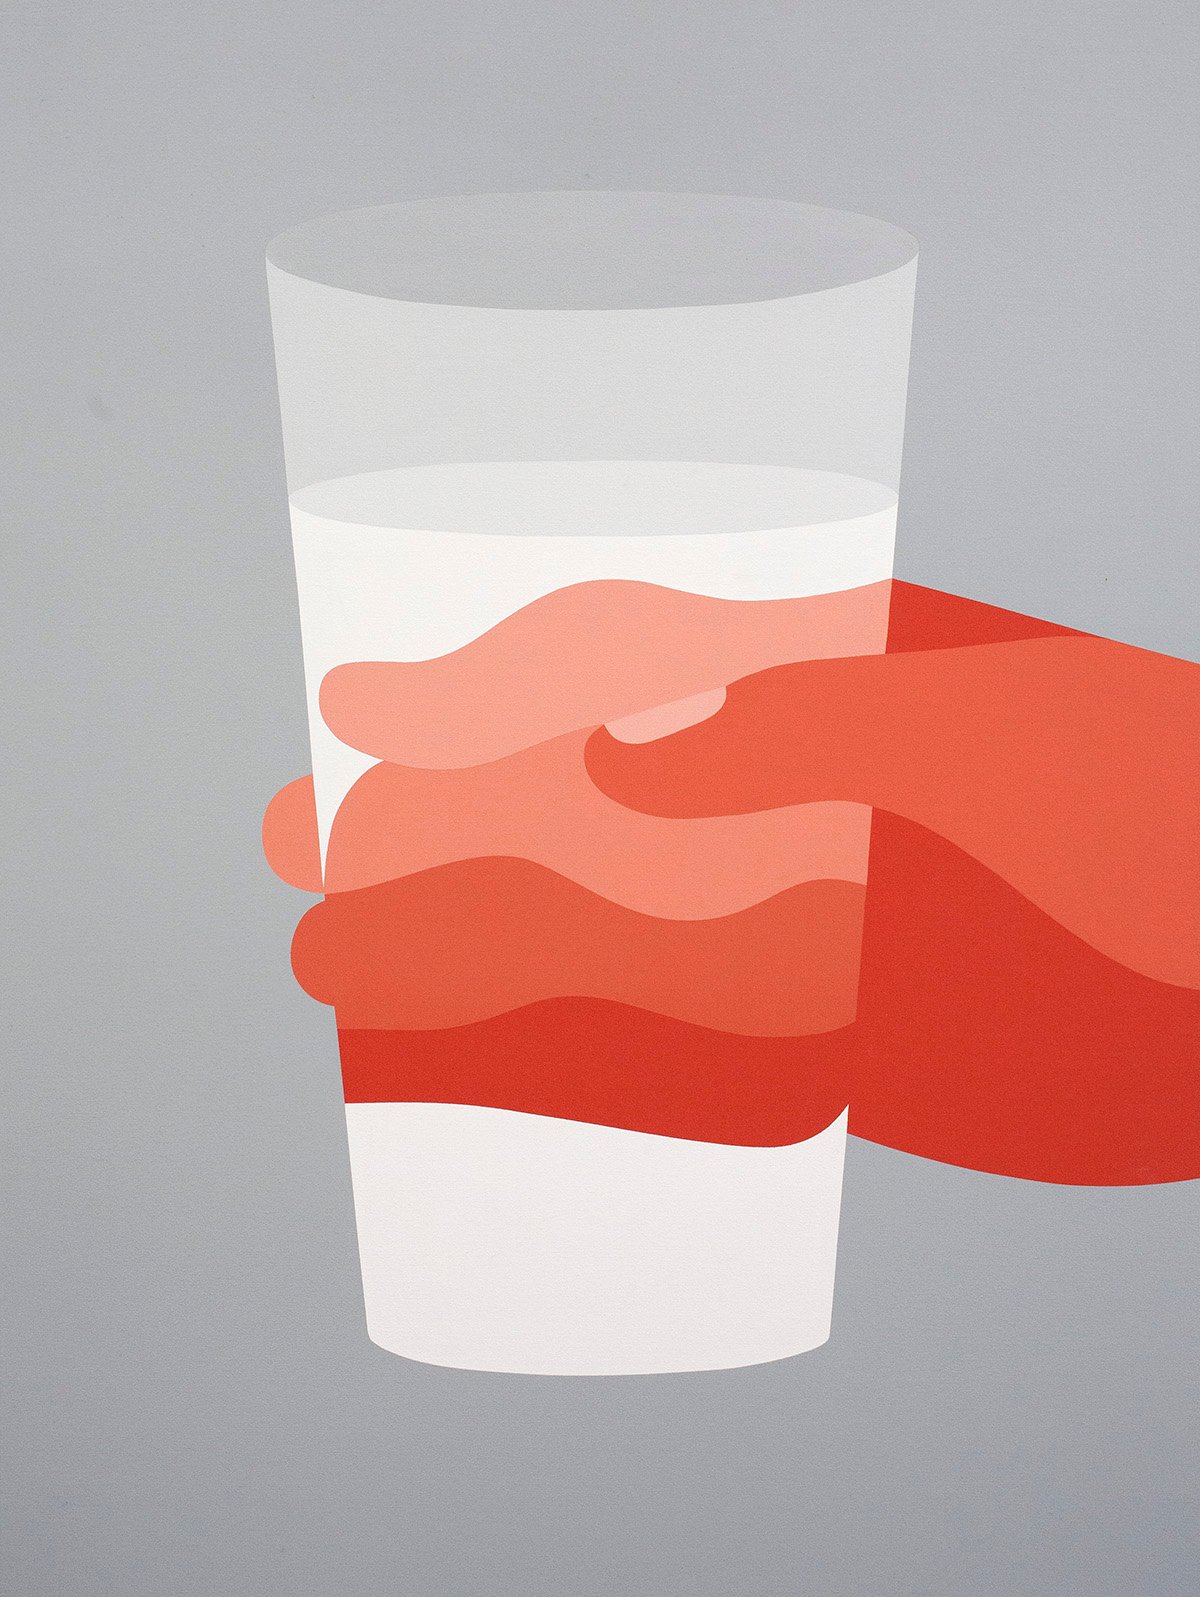 A Proposal For A Glass of Water (2012). Image courtesy Geoff McFetridge.